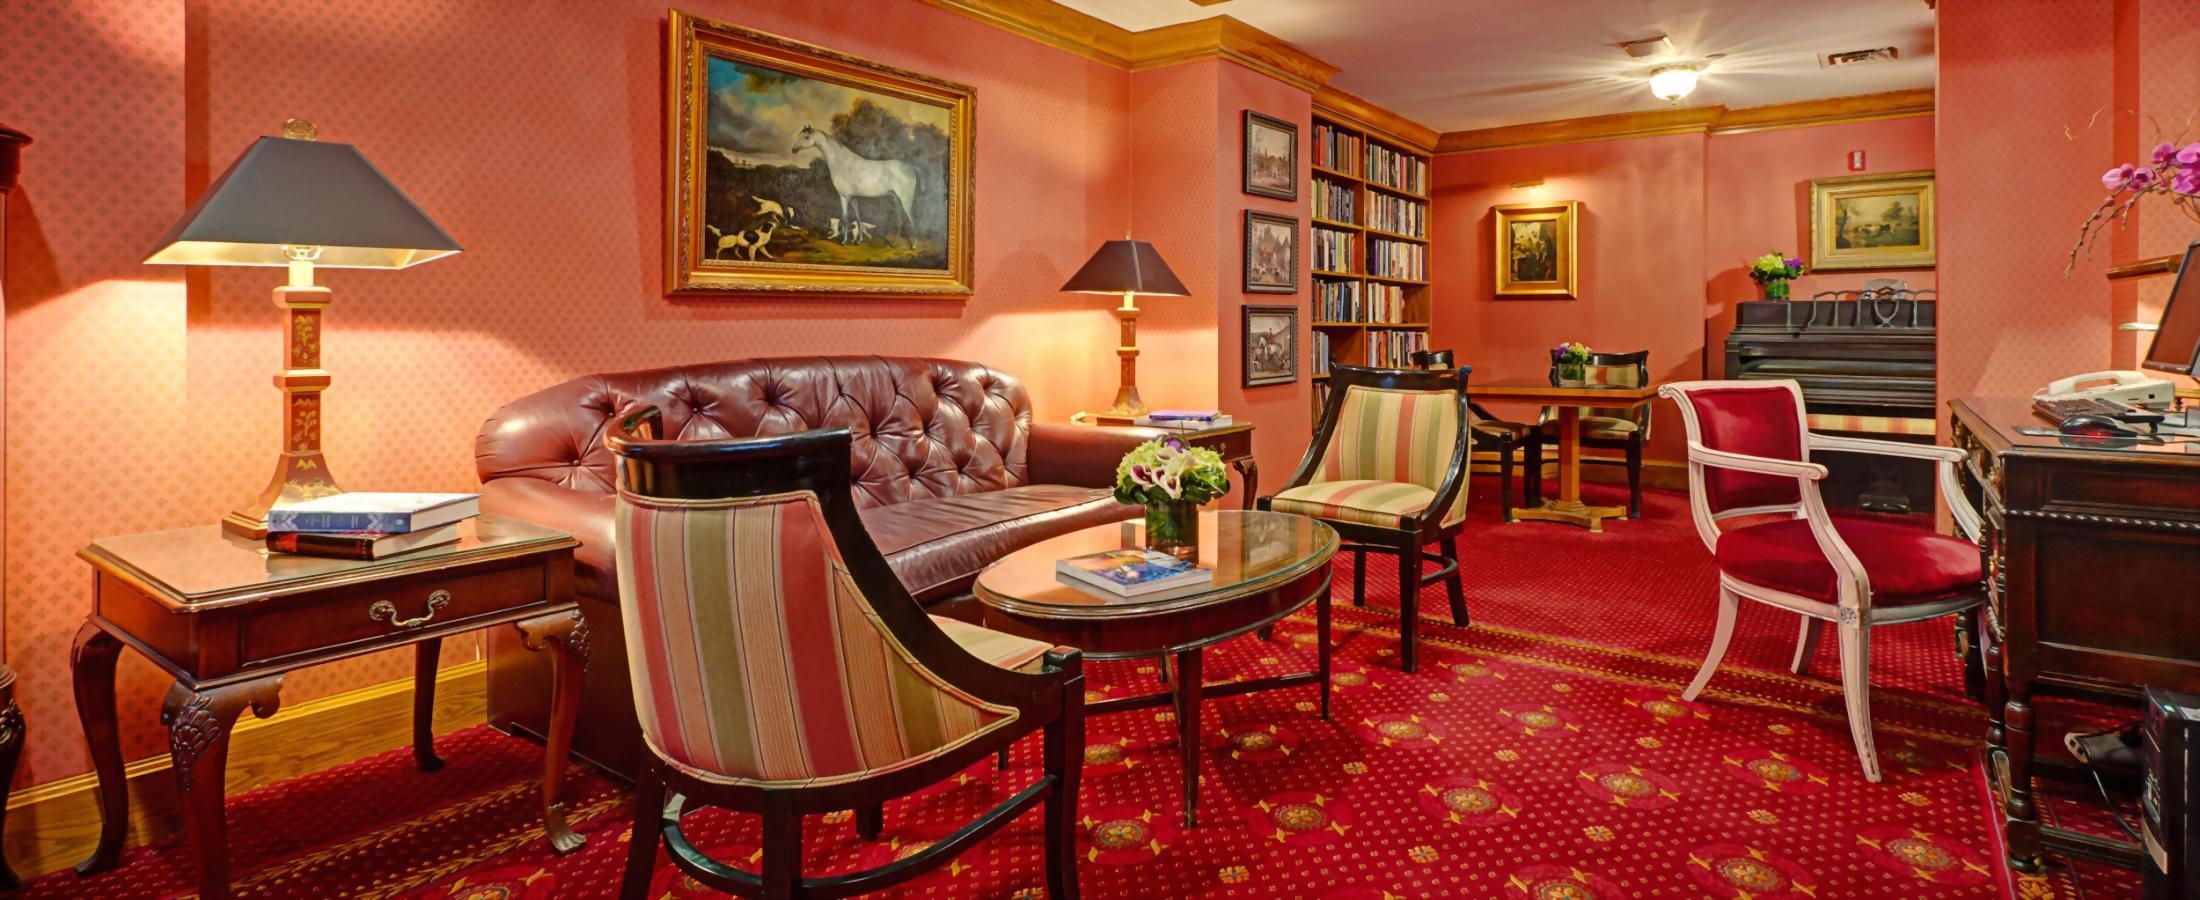 The Library at the Hotel Elysee by Library Hotel Collection is open for guests to enjoy a book, or use the computer.  There is a printer available for printing tickets or boarding passes.